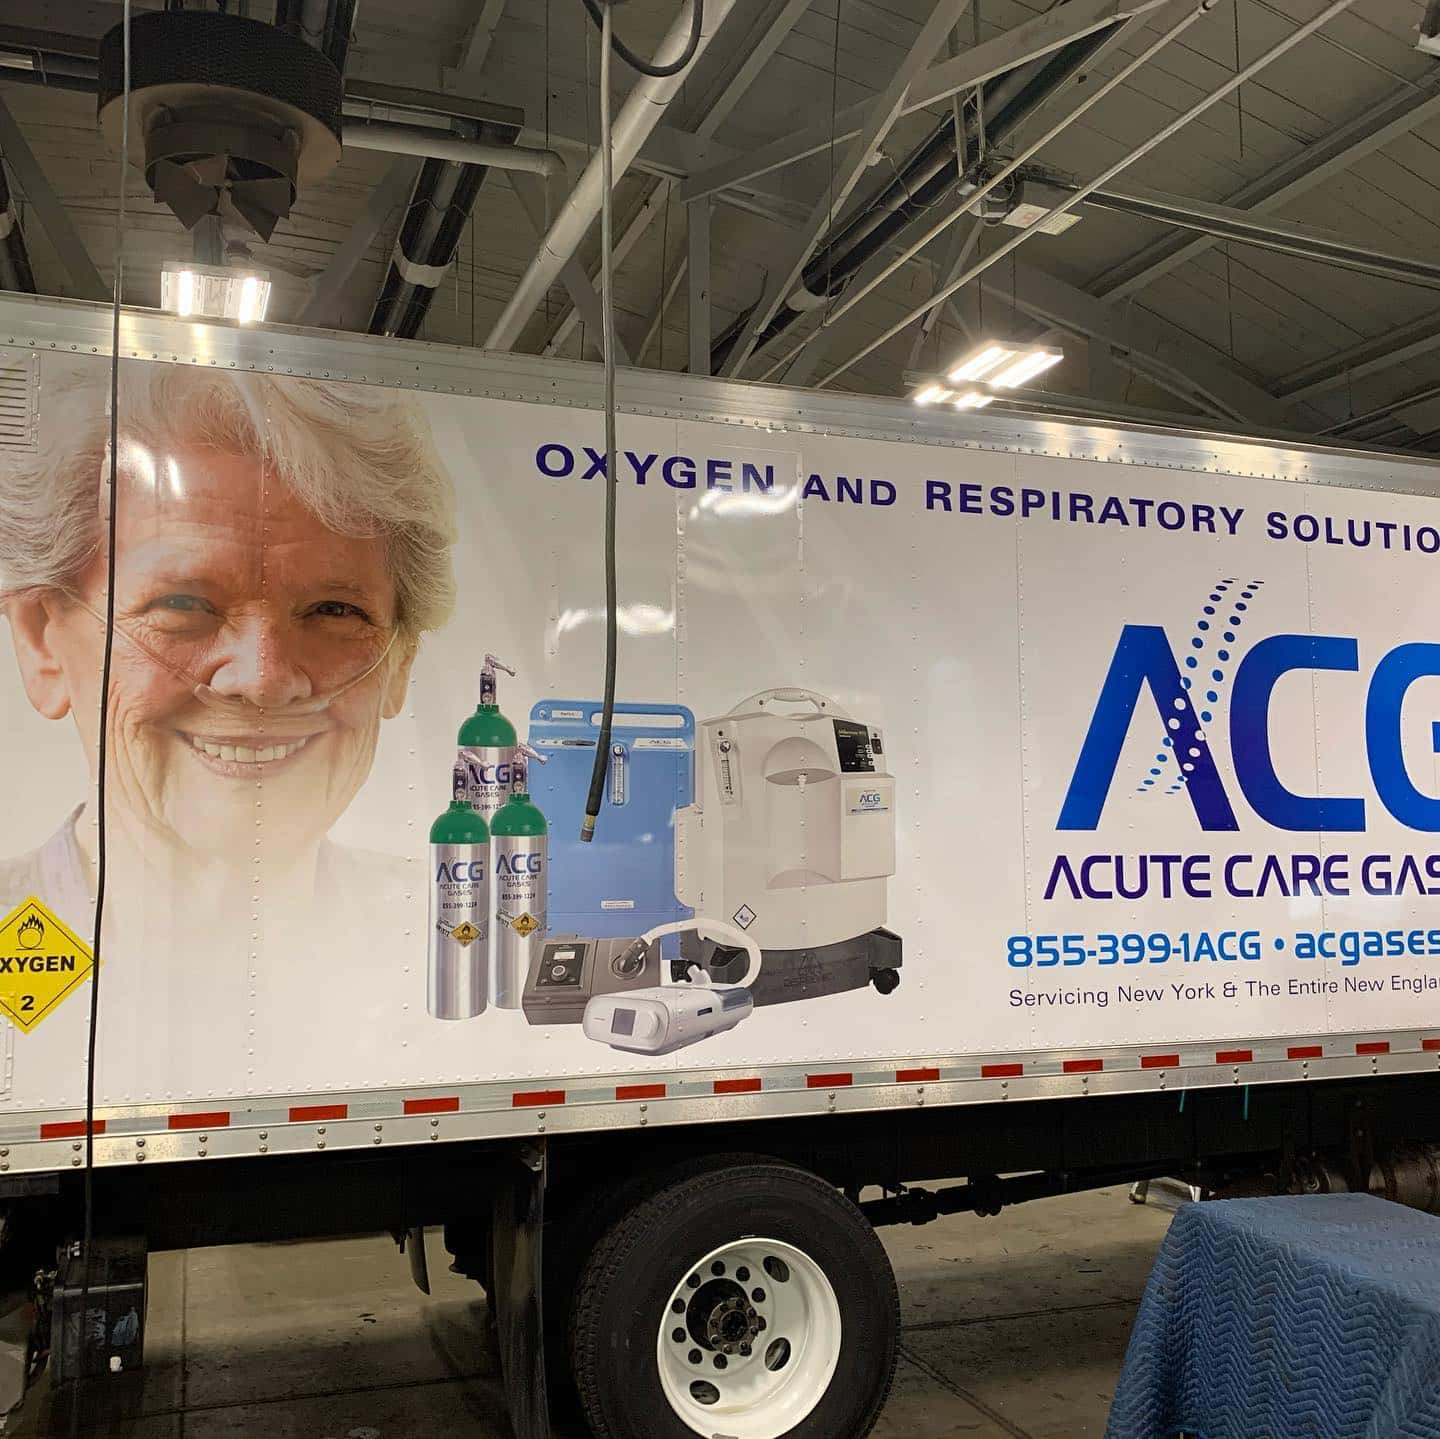 Acute Care Gas Ryder Truck Rental and Leasin 2